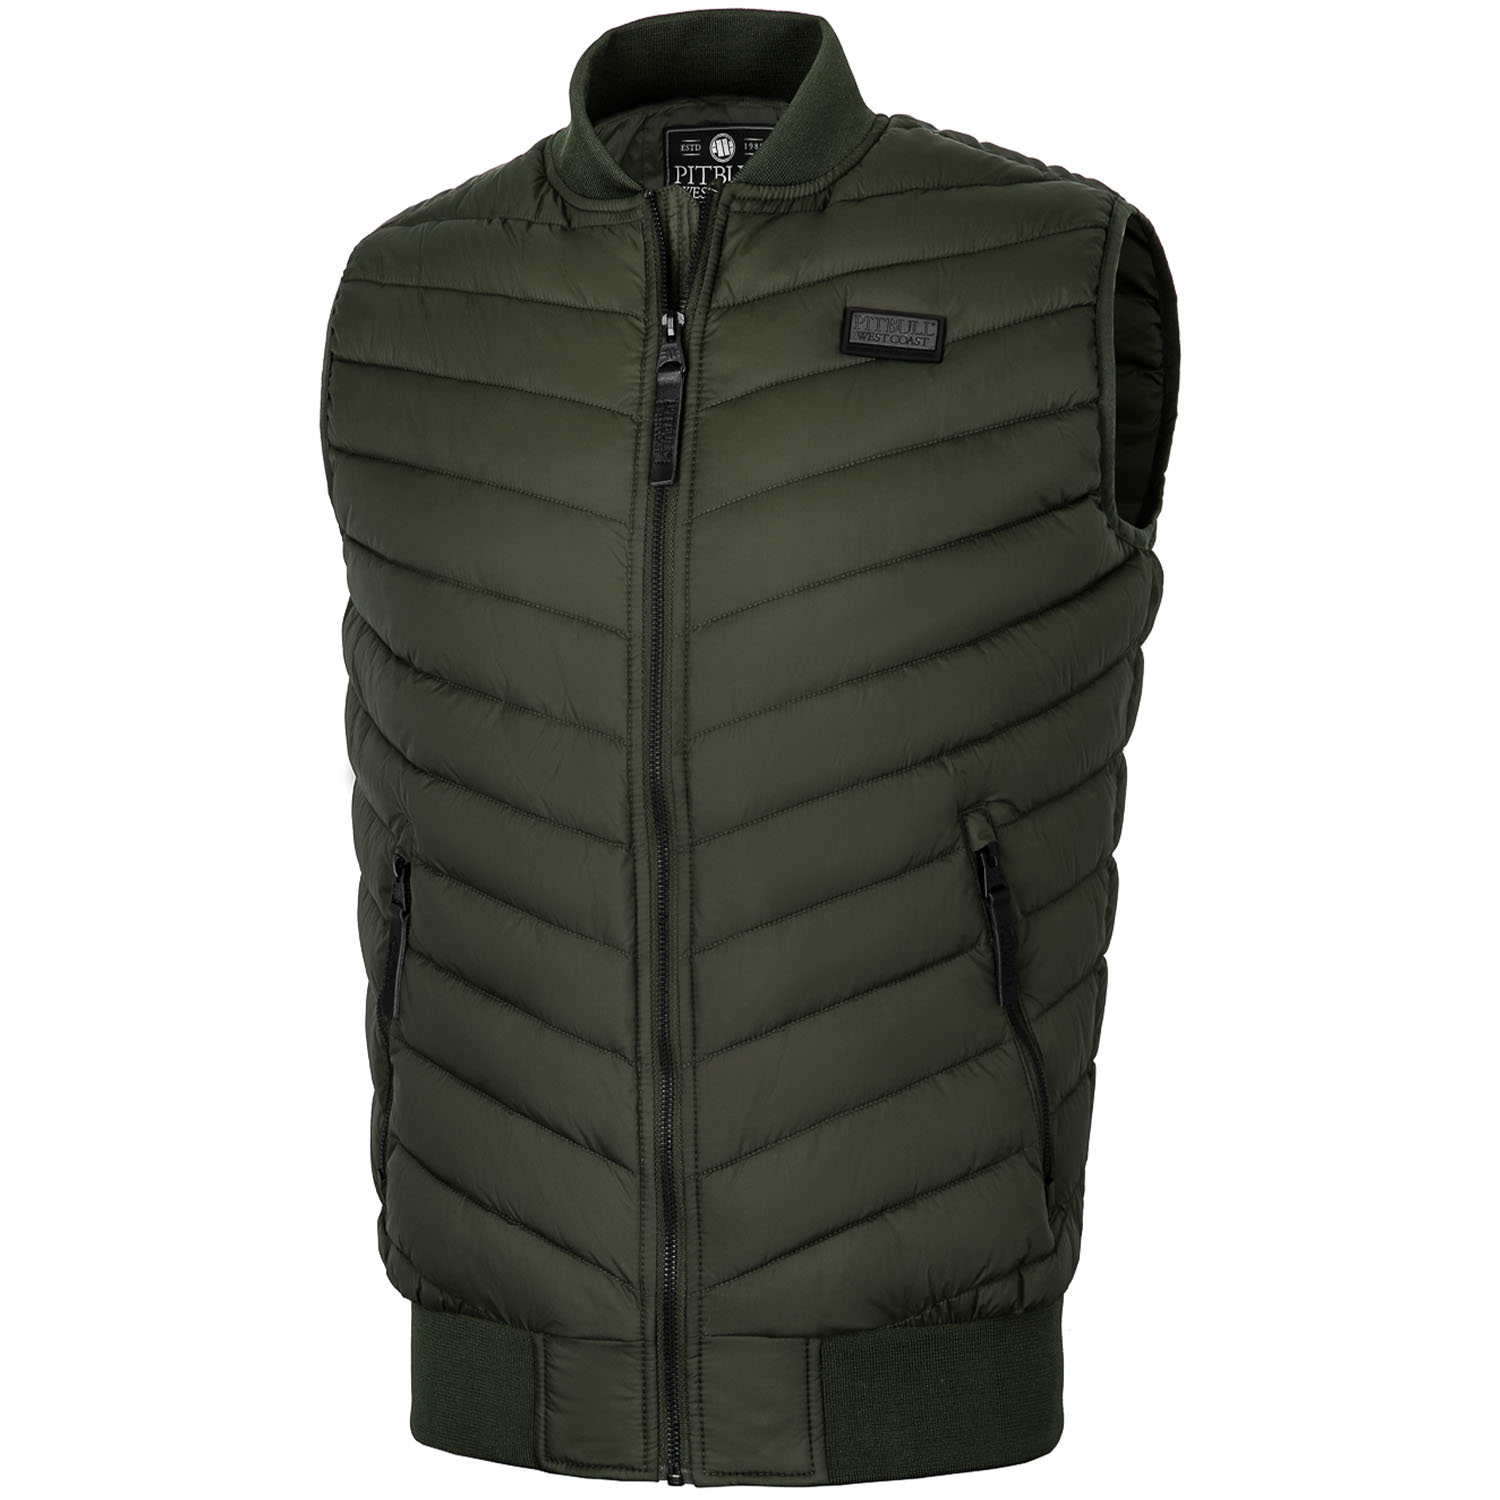 Pit Bull West Coast Vest, Quilted Halley, olive, S